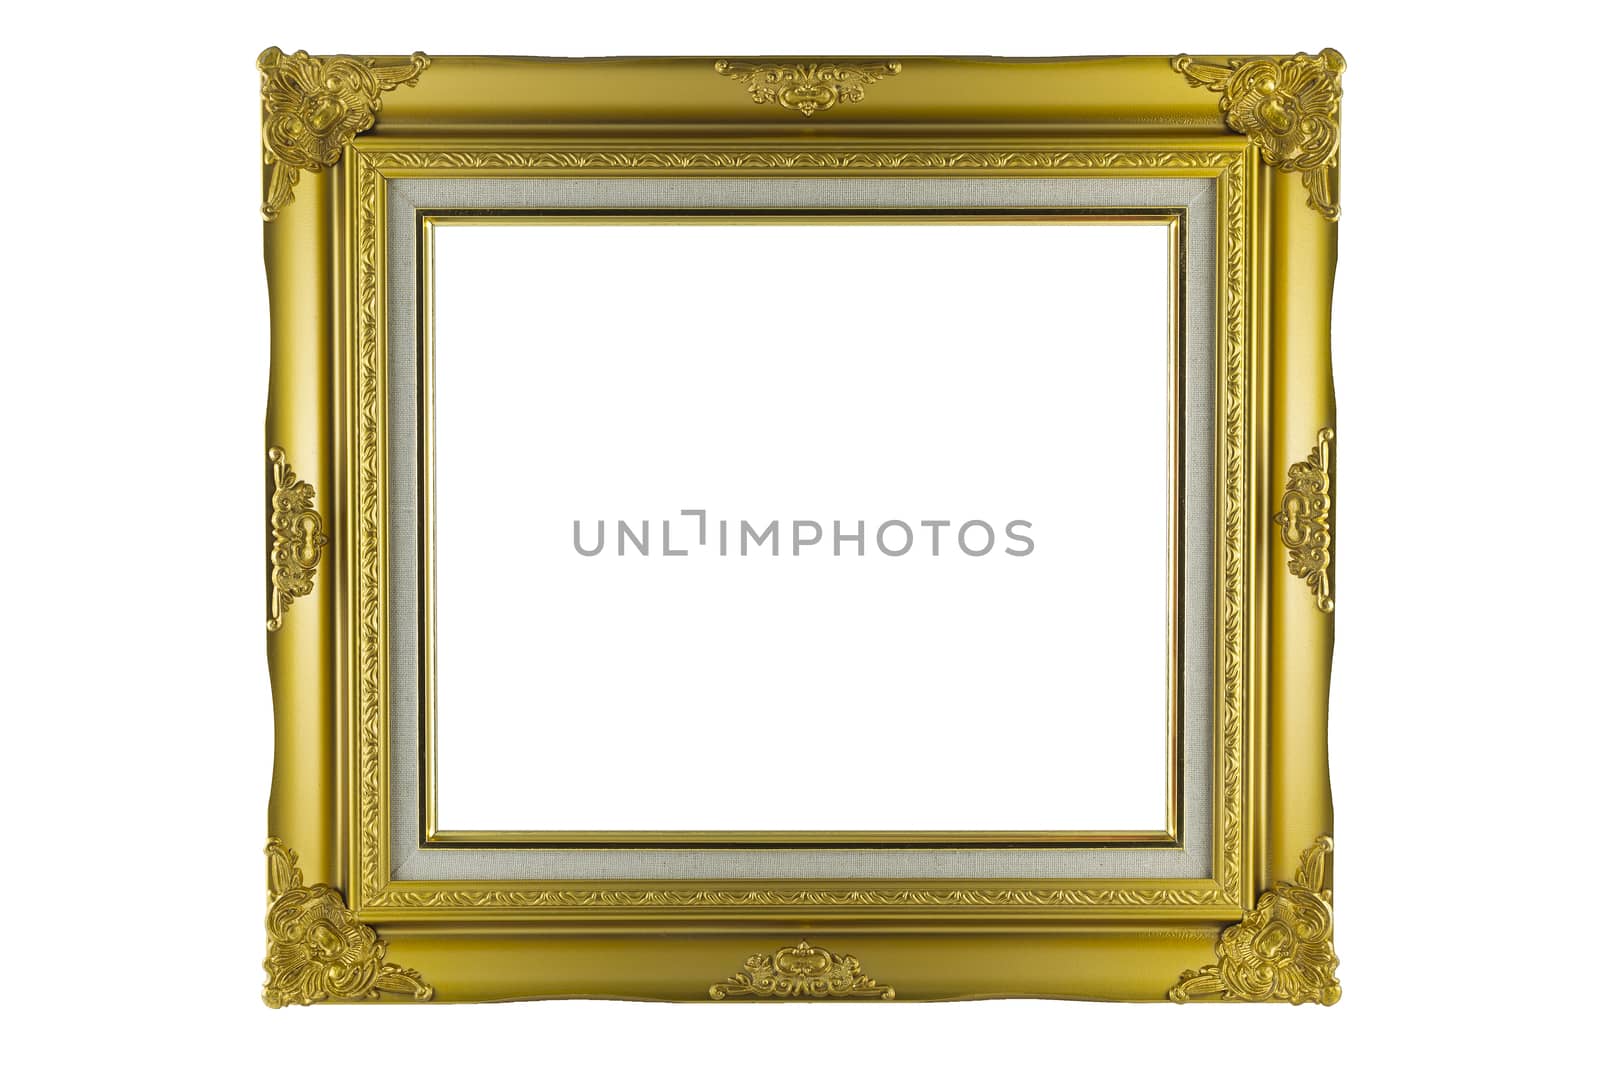 Bronze and Gold Frame vintage isolated on white background. by jayzynism